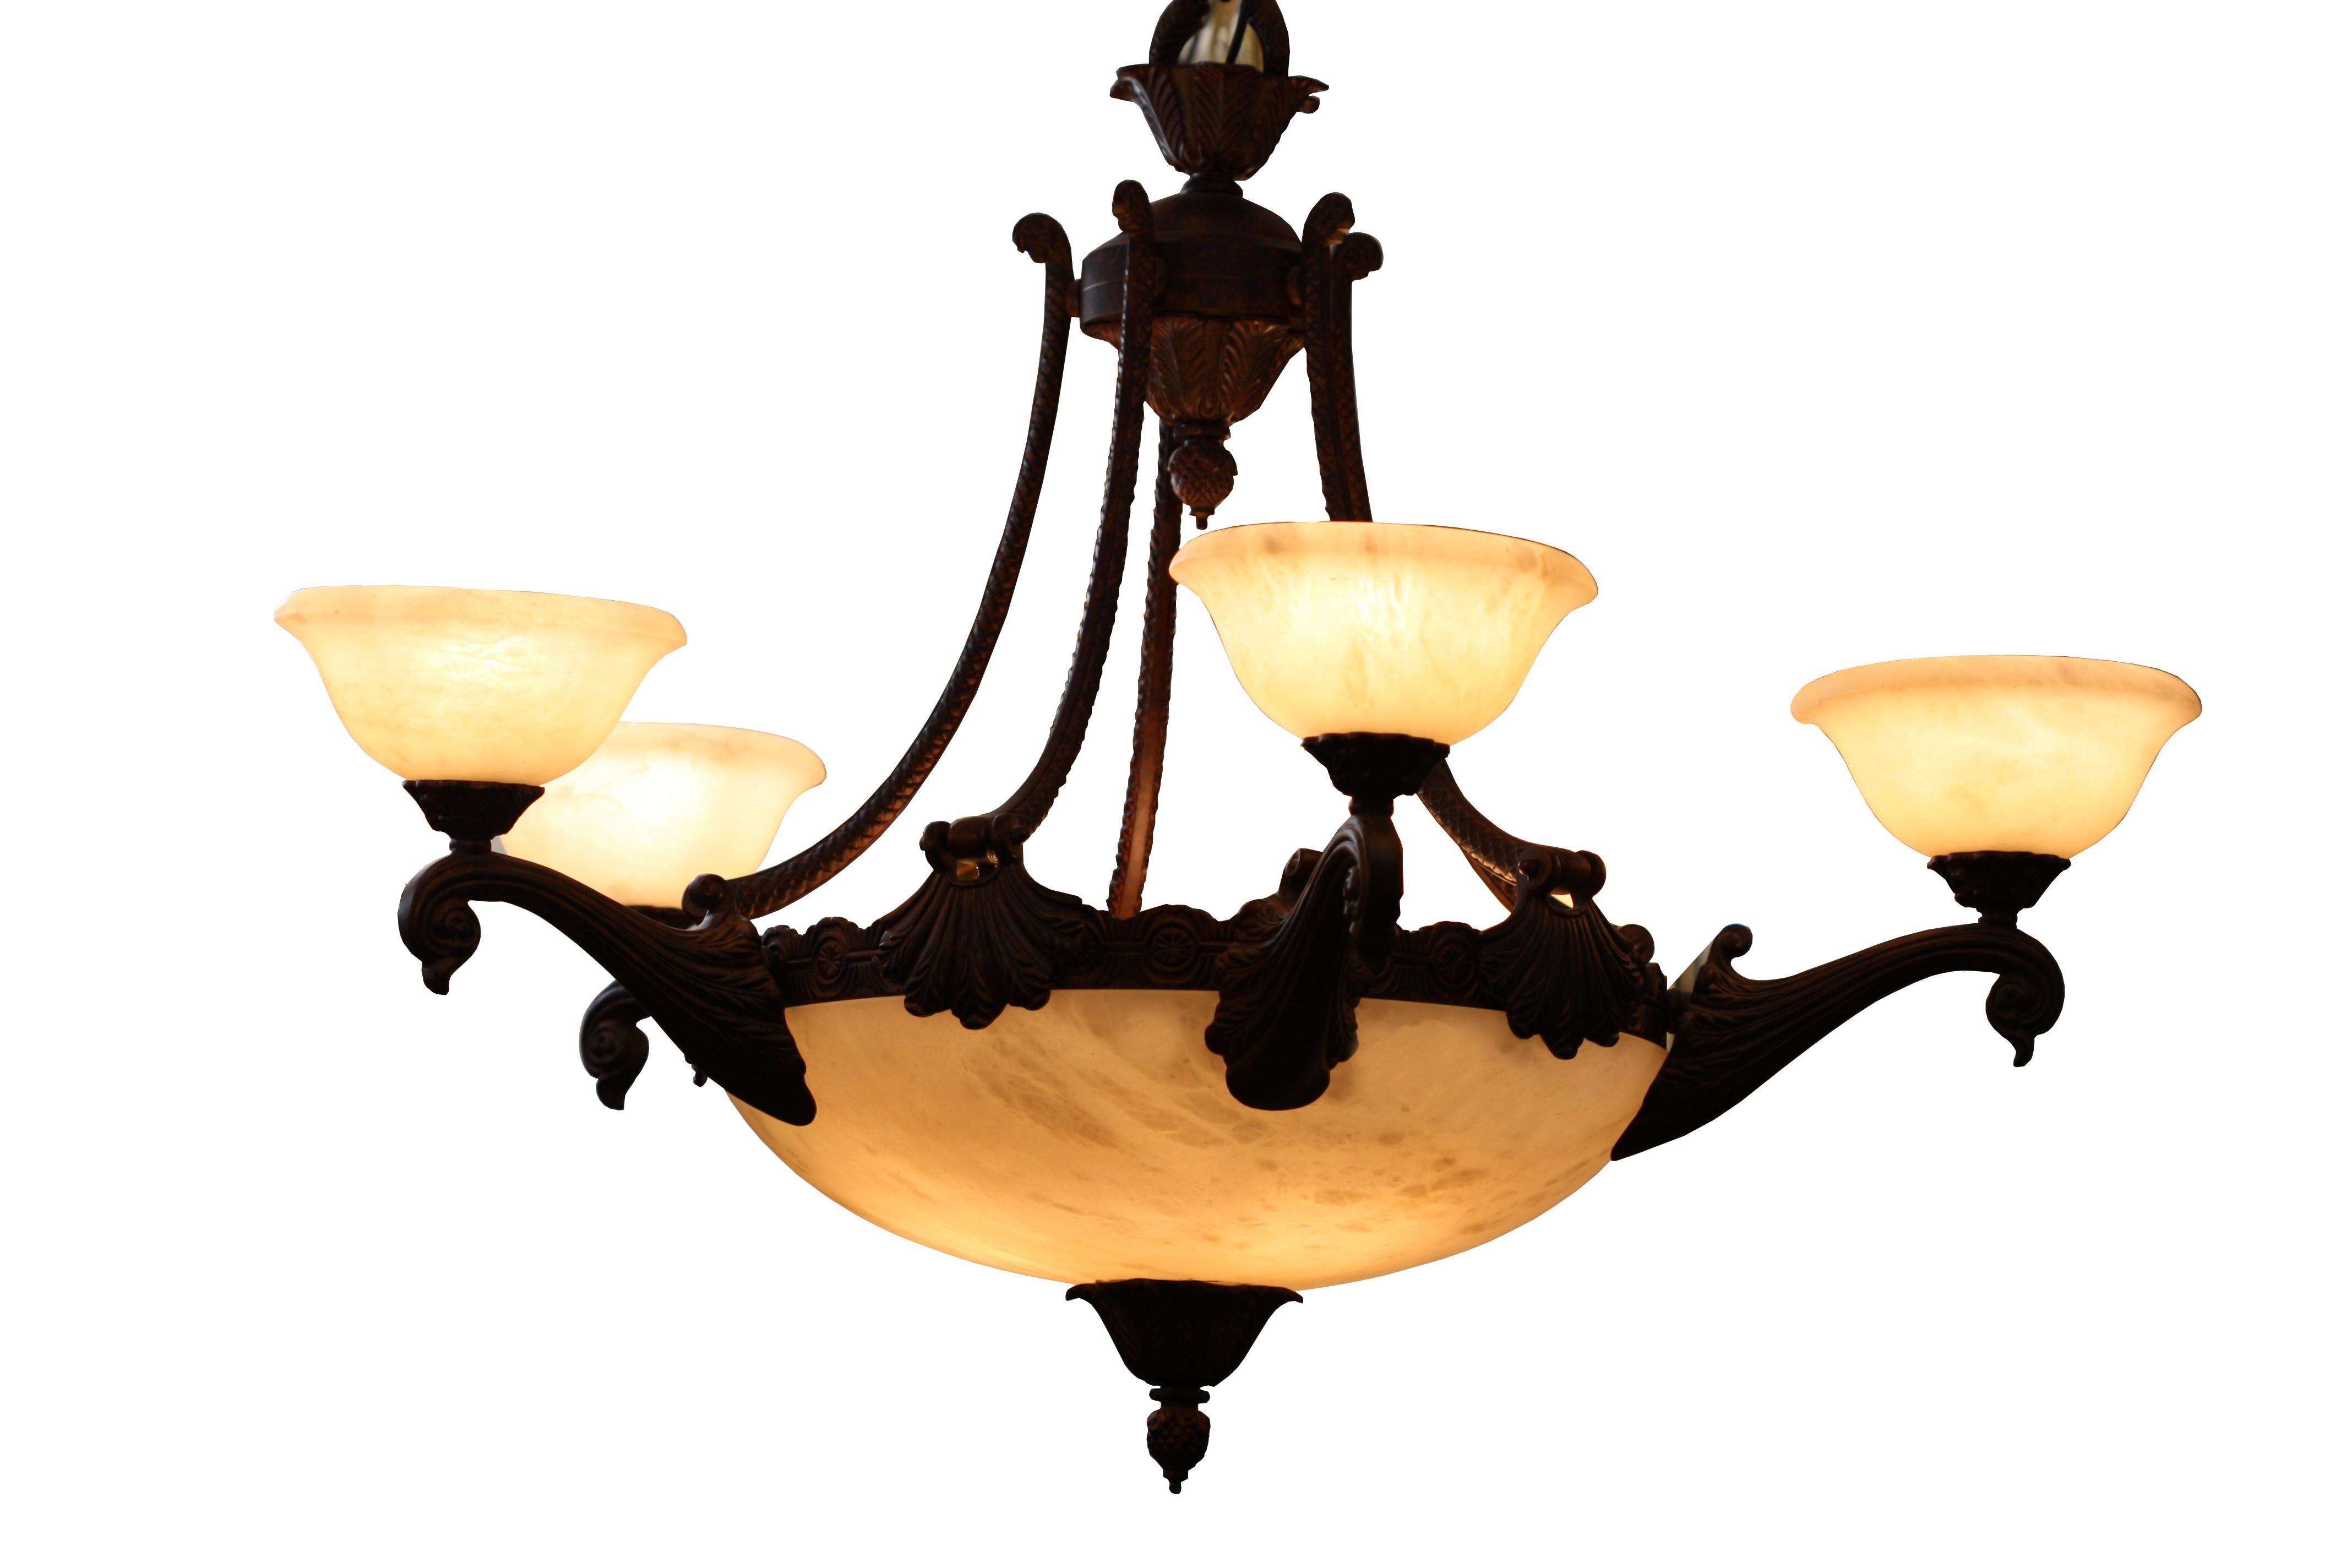 Five light Italian alabaster and bronze chandelier, fourth quarter of the 20th century. Measures: Height 24 in. (60.96 cm.)
Width 33 in. (83.82 cm.).